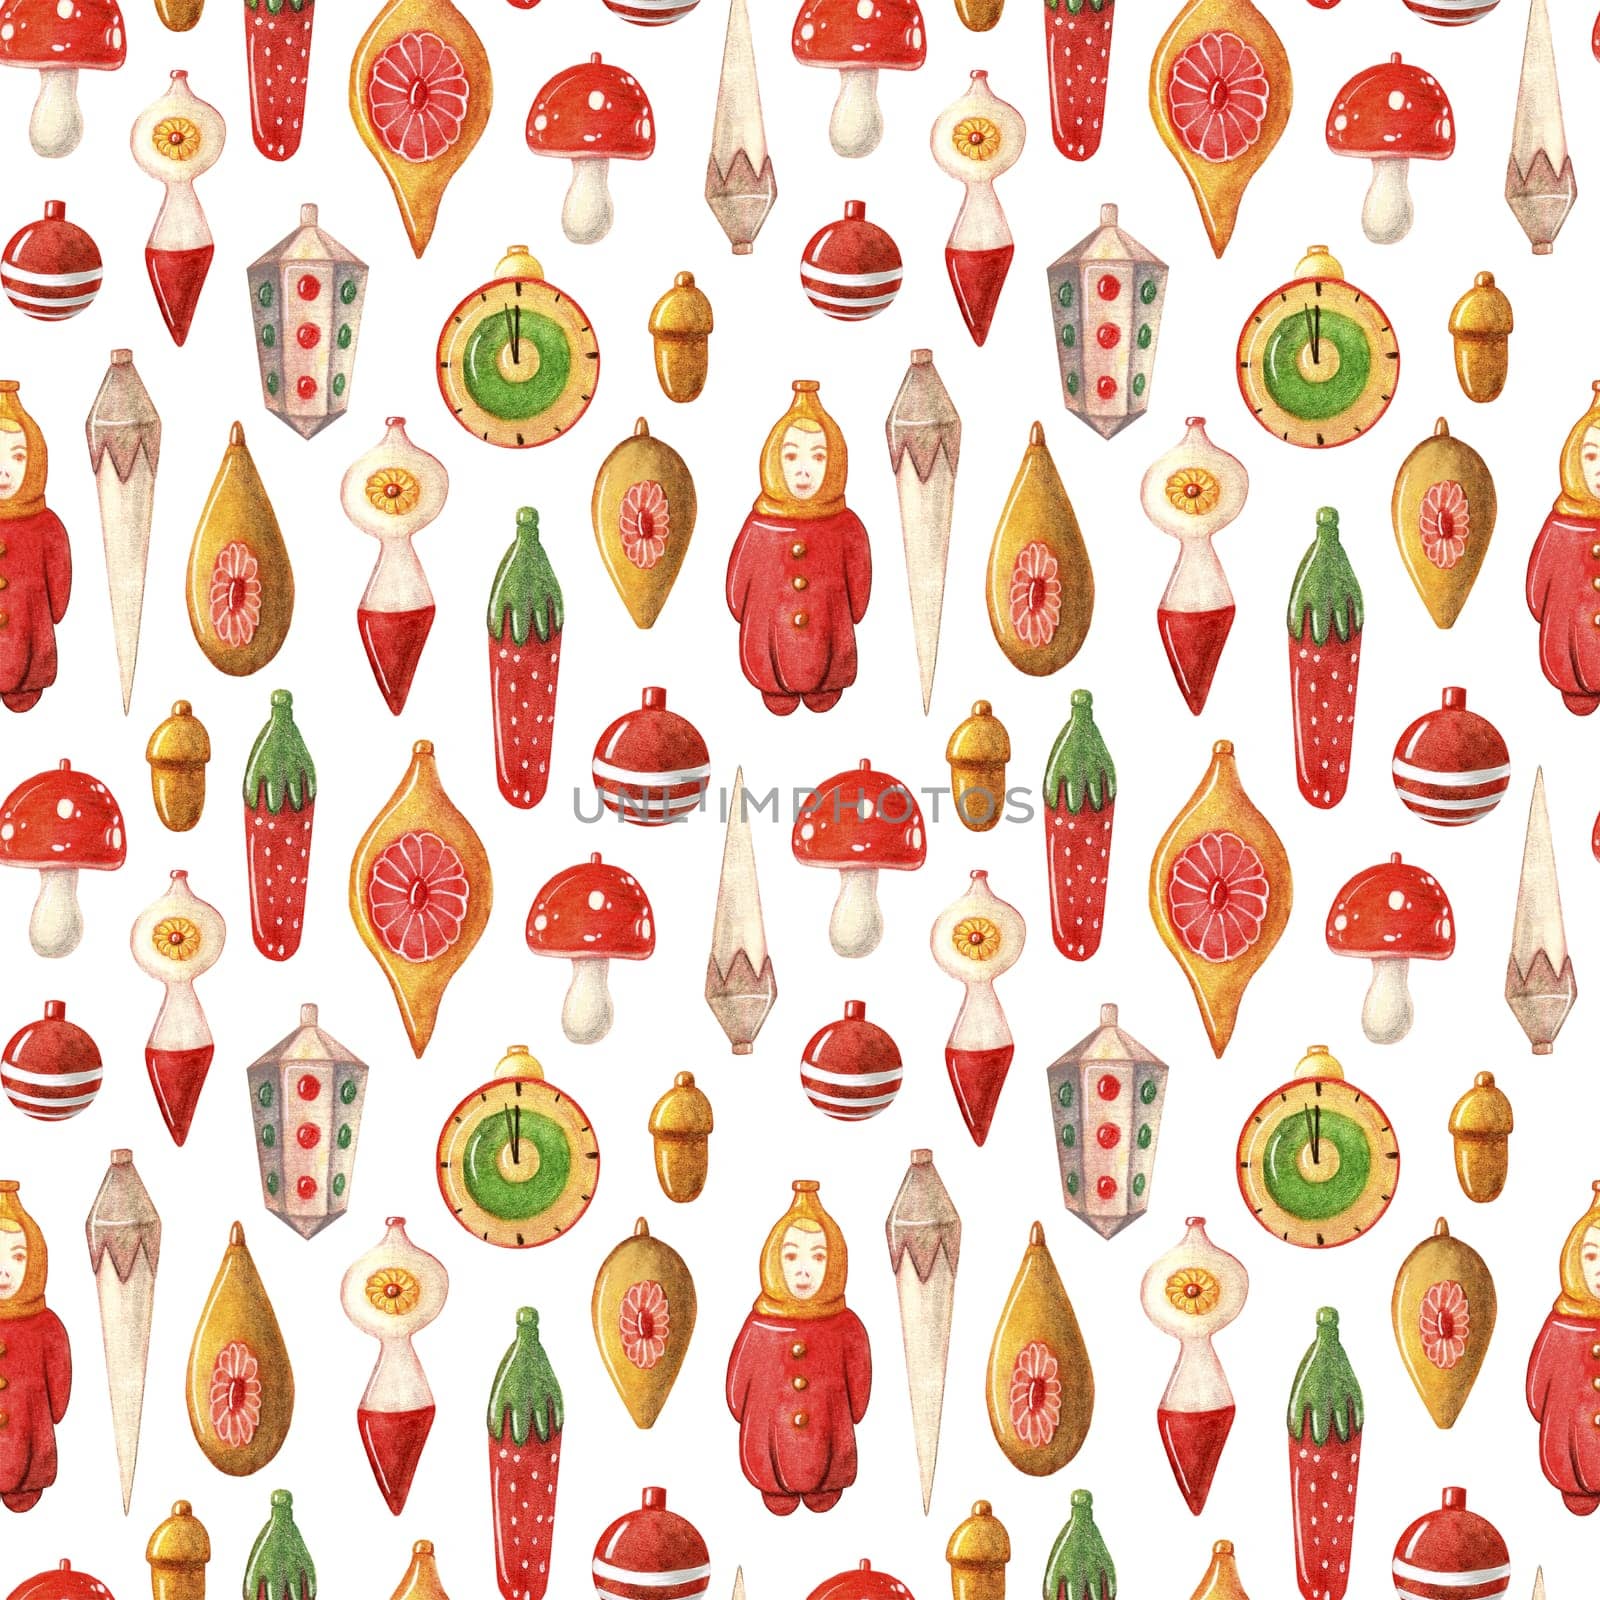 Vintage Christmas toys watercolor seamless pattern. New Year greeting card. It can be used to decorate holiday packages, fabrics, wrapping paper, textiles isolated on white background.